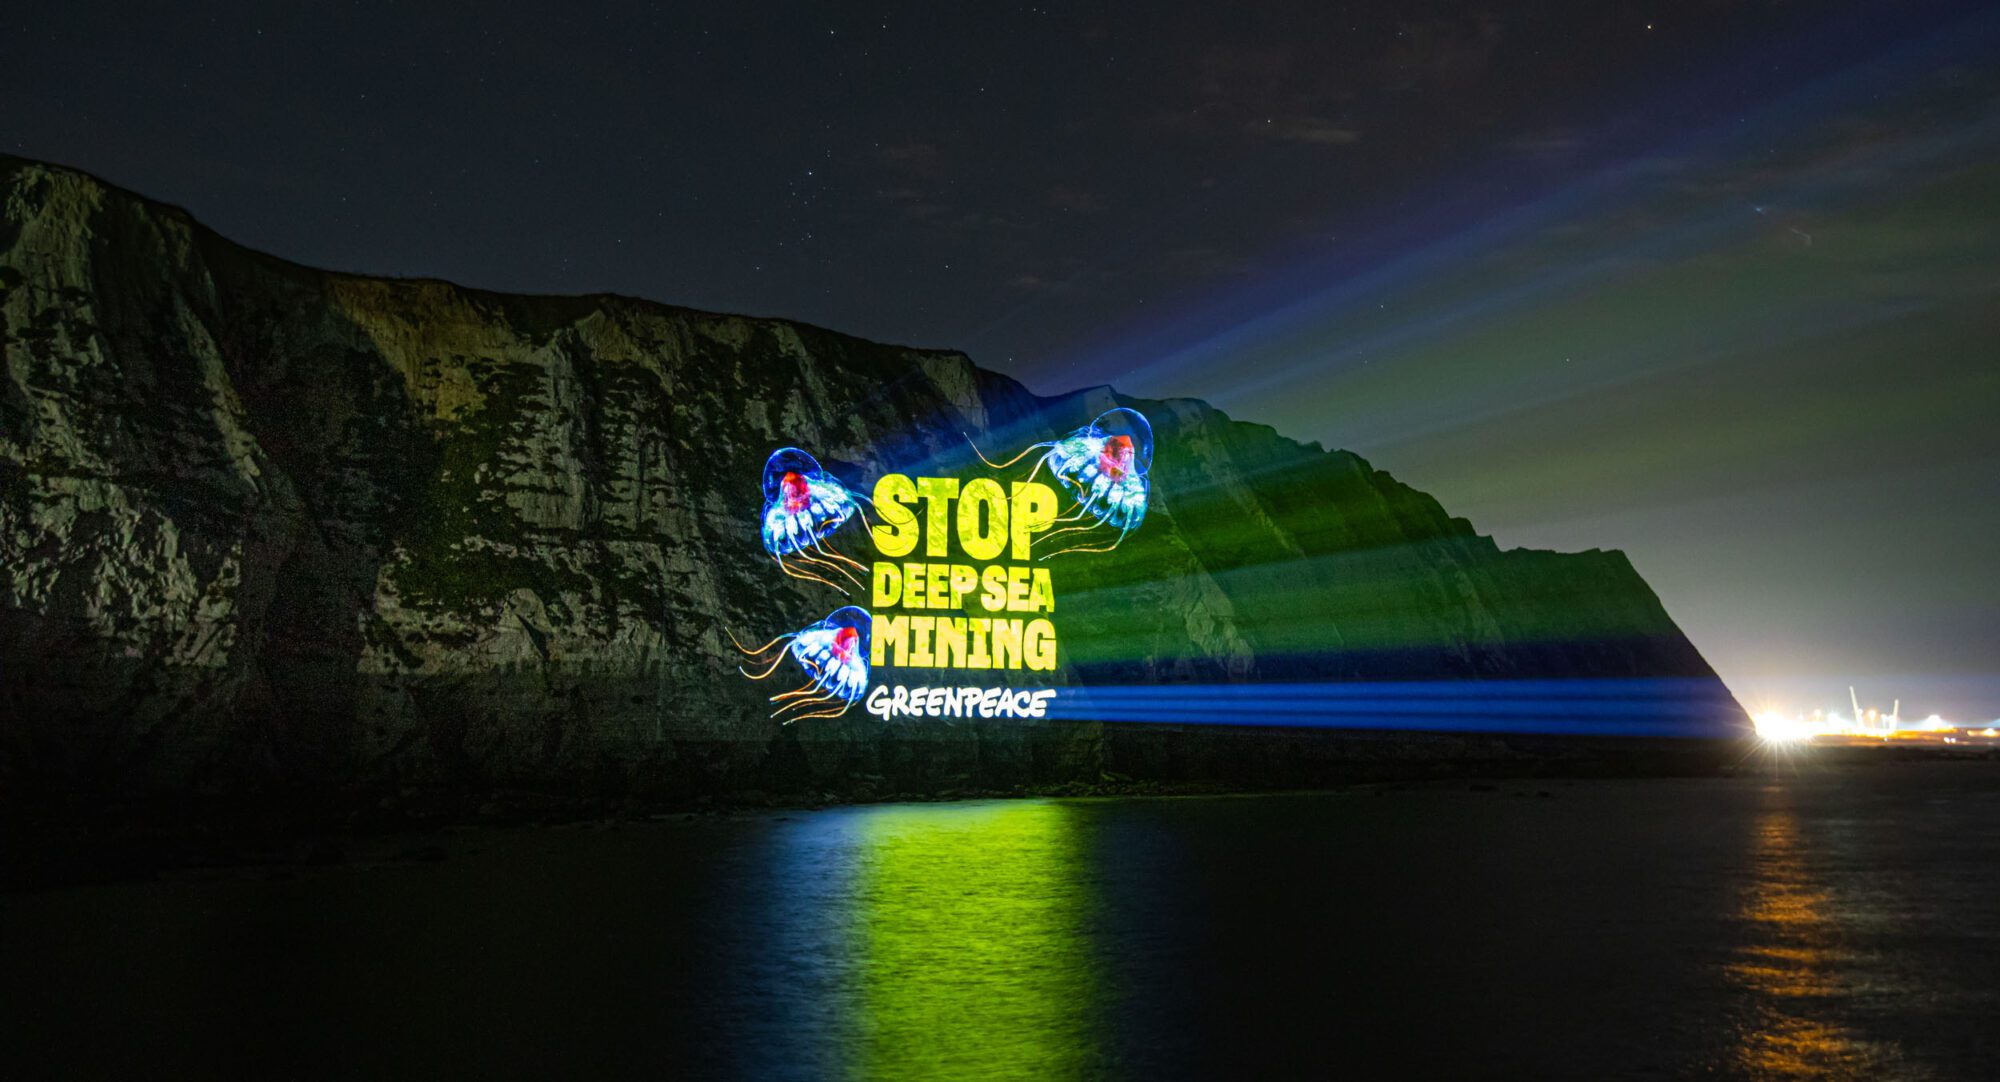 A nighttime cliffside is daak except for a massive projection reading 'stop deep sea mining', surrounded by colourful drawings of jellyfish. The light for the projection streams in in yellow and blue from the right of the image